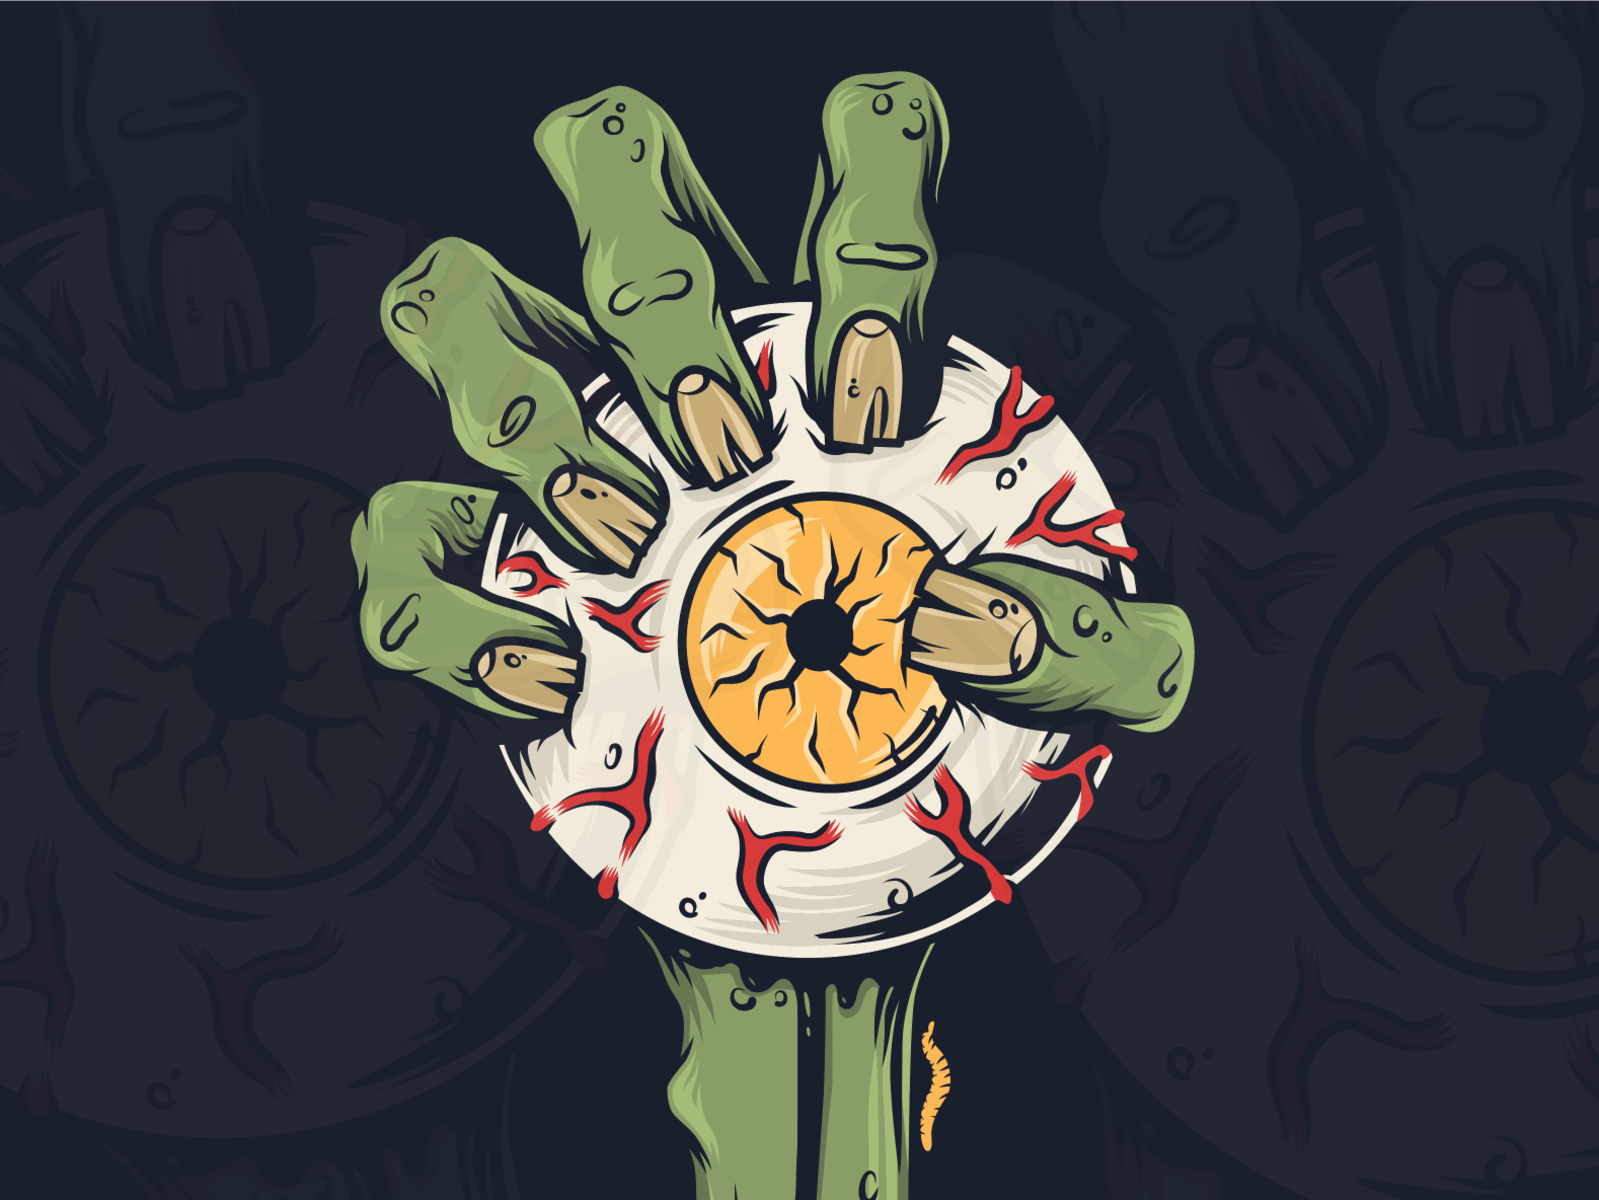 Zombie hand by Casoalfonso on Dribbble